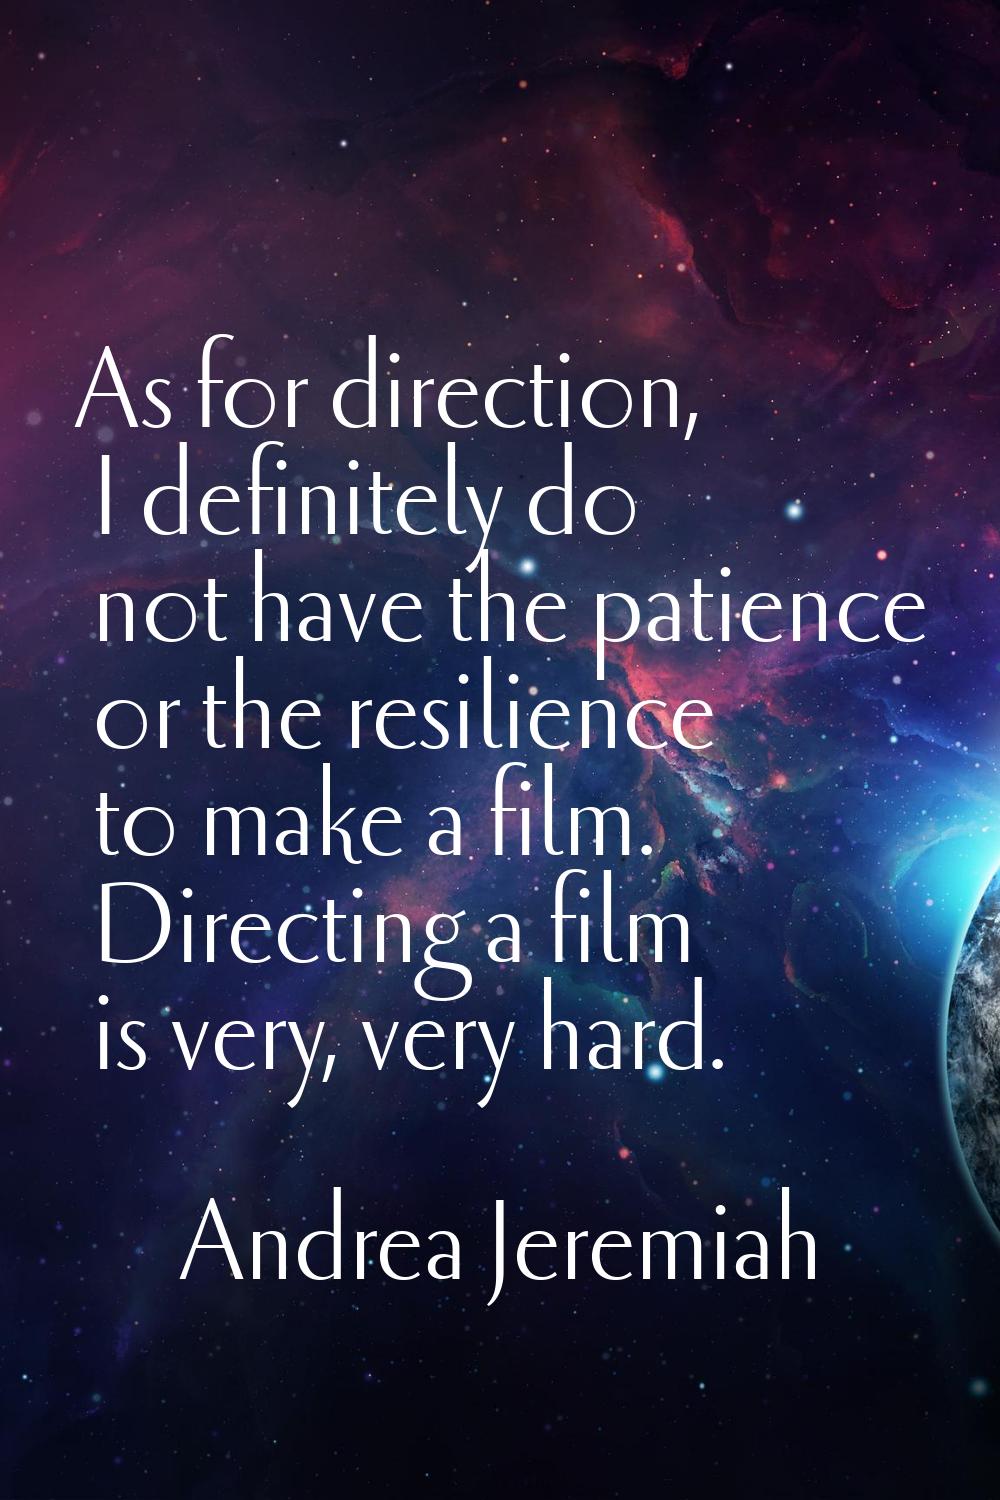 As for direction, I definitely do not have the patience or the resilience to make a film. Directing